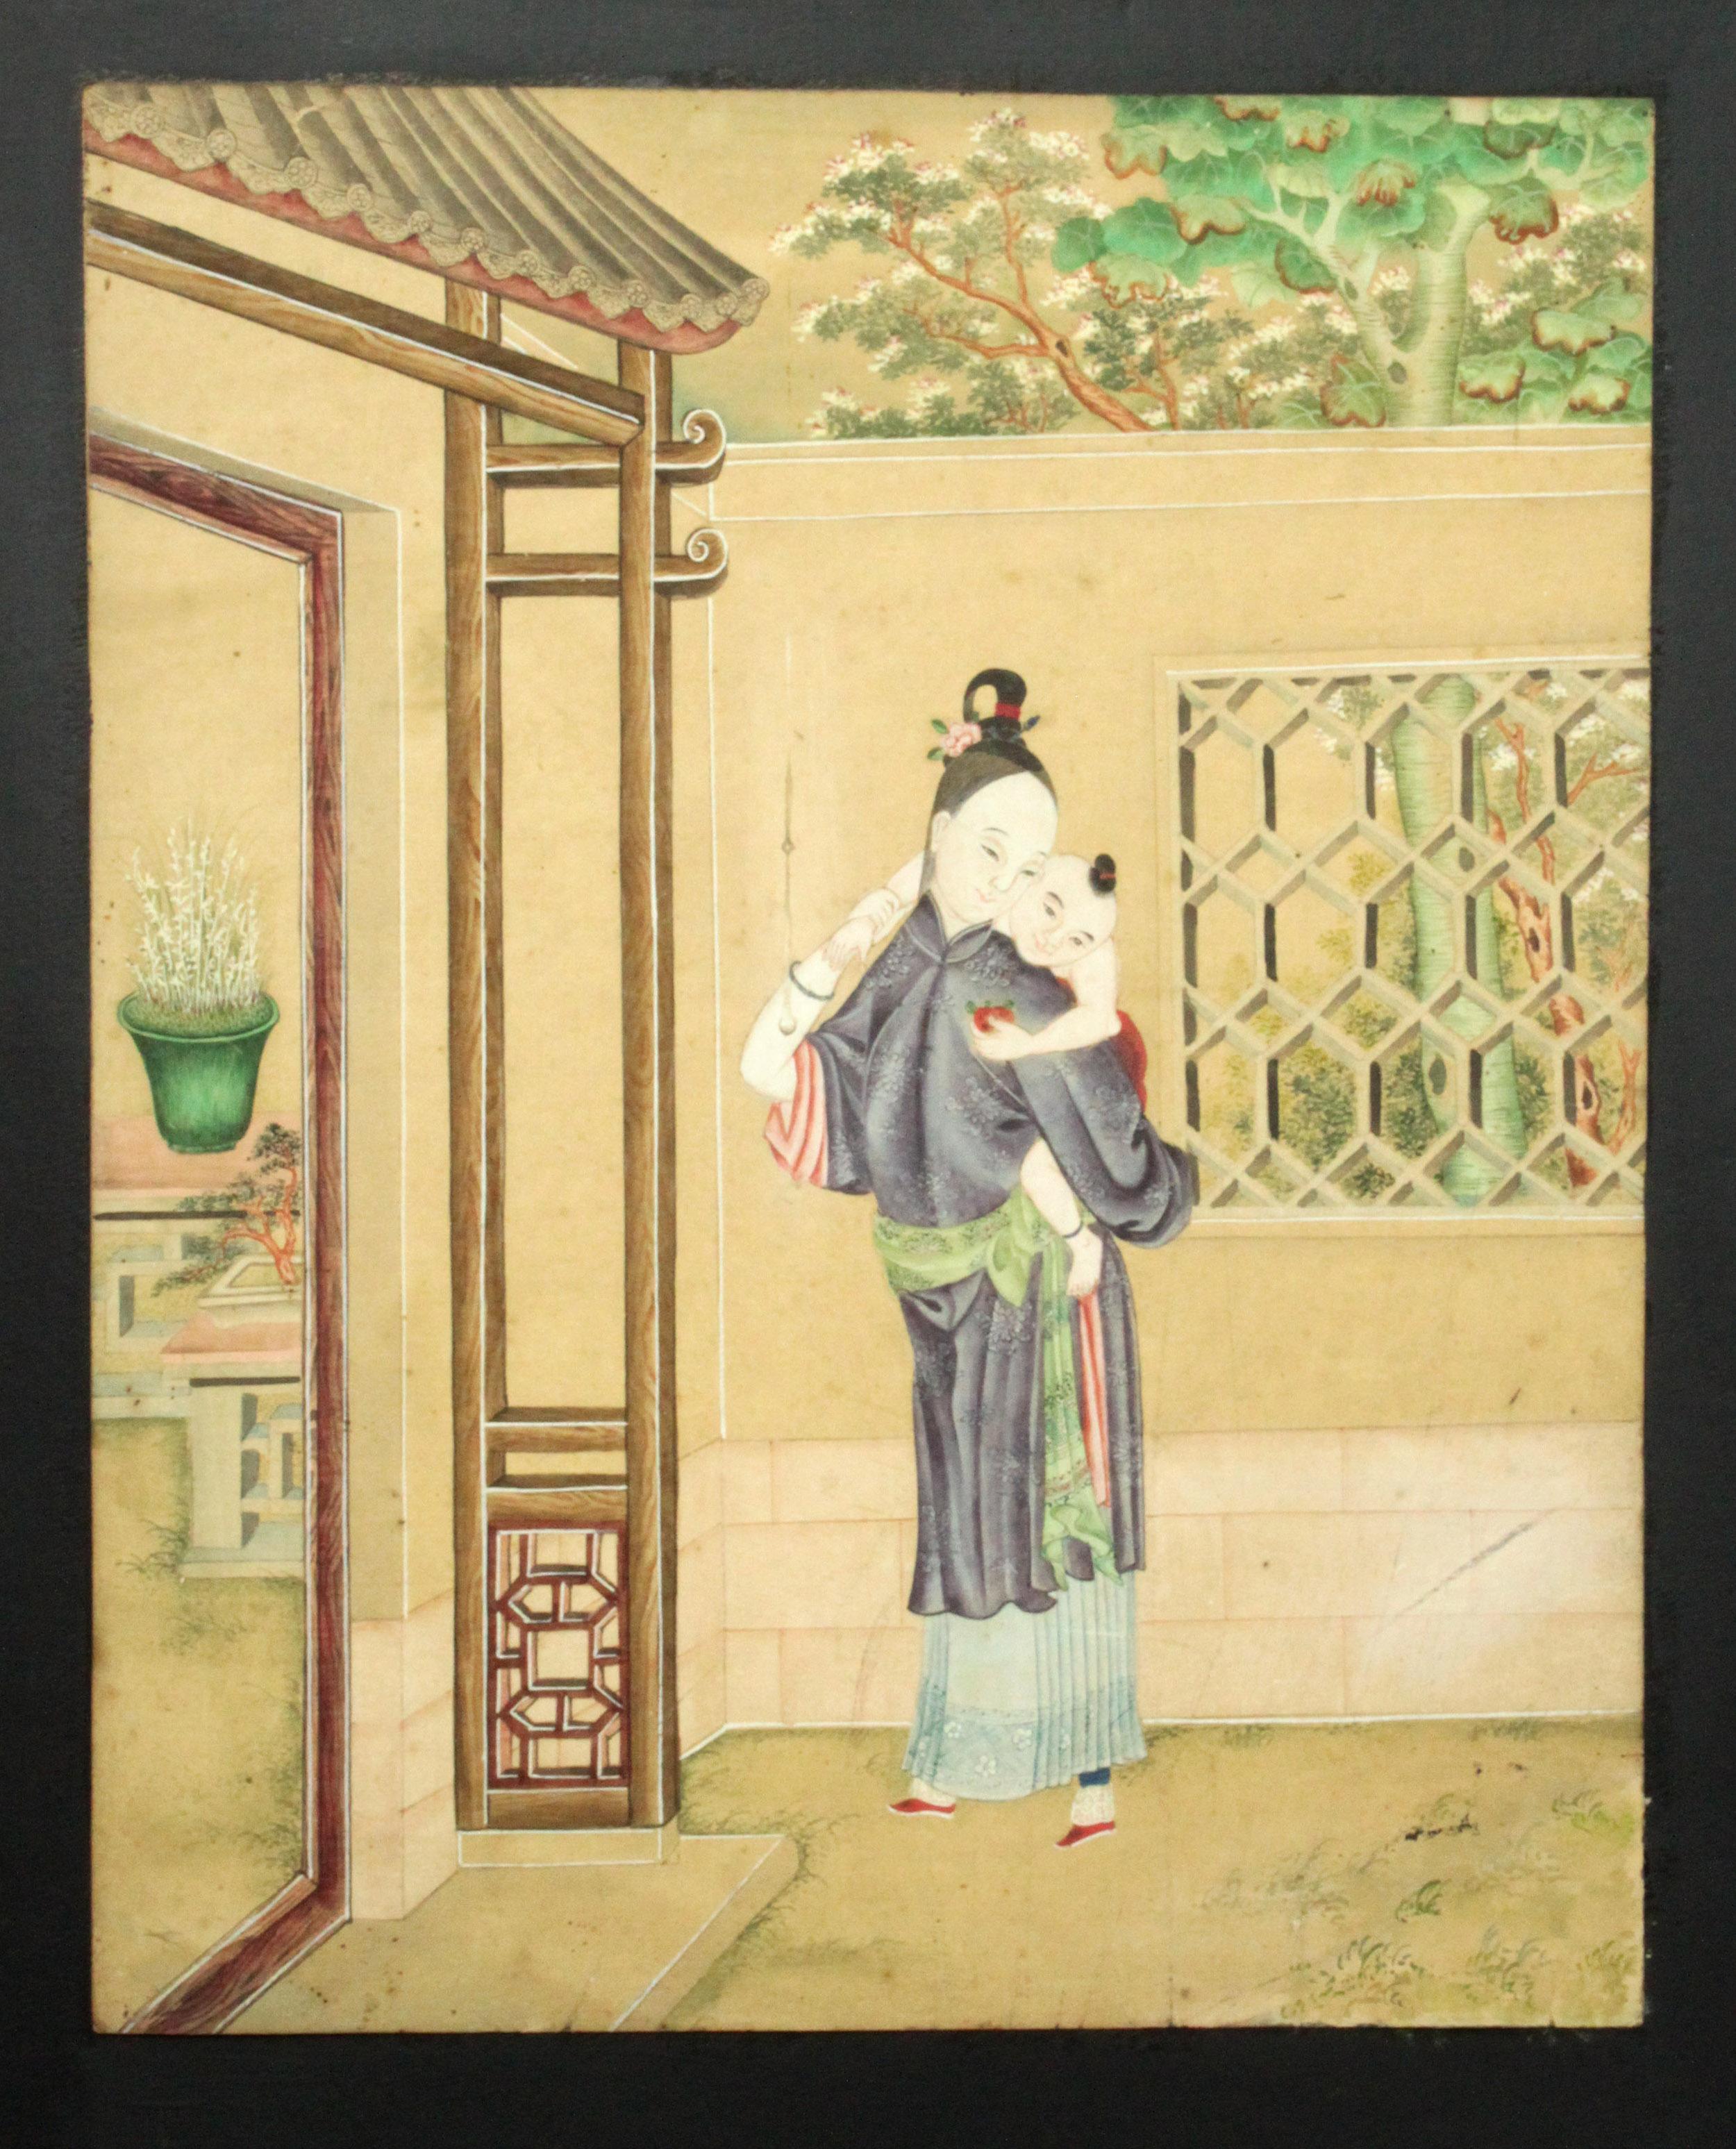 Set of 12 Substantial Chinese Watercolors Mounted on a Four-Fold Screen For Sale 3